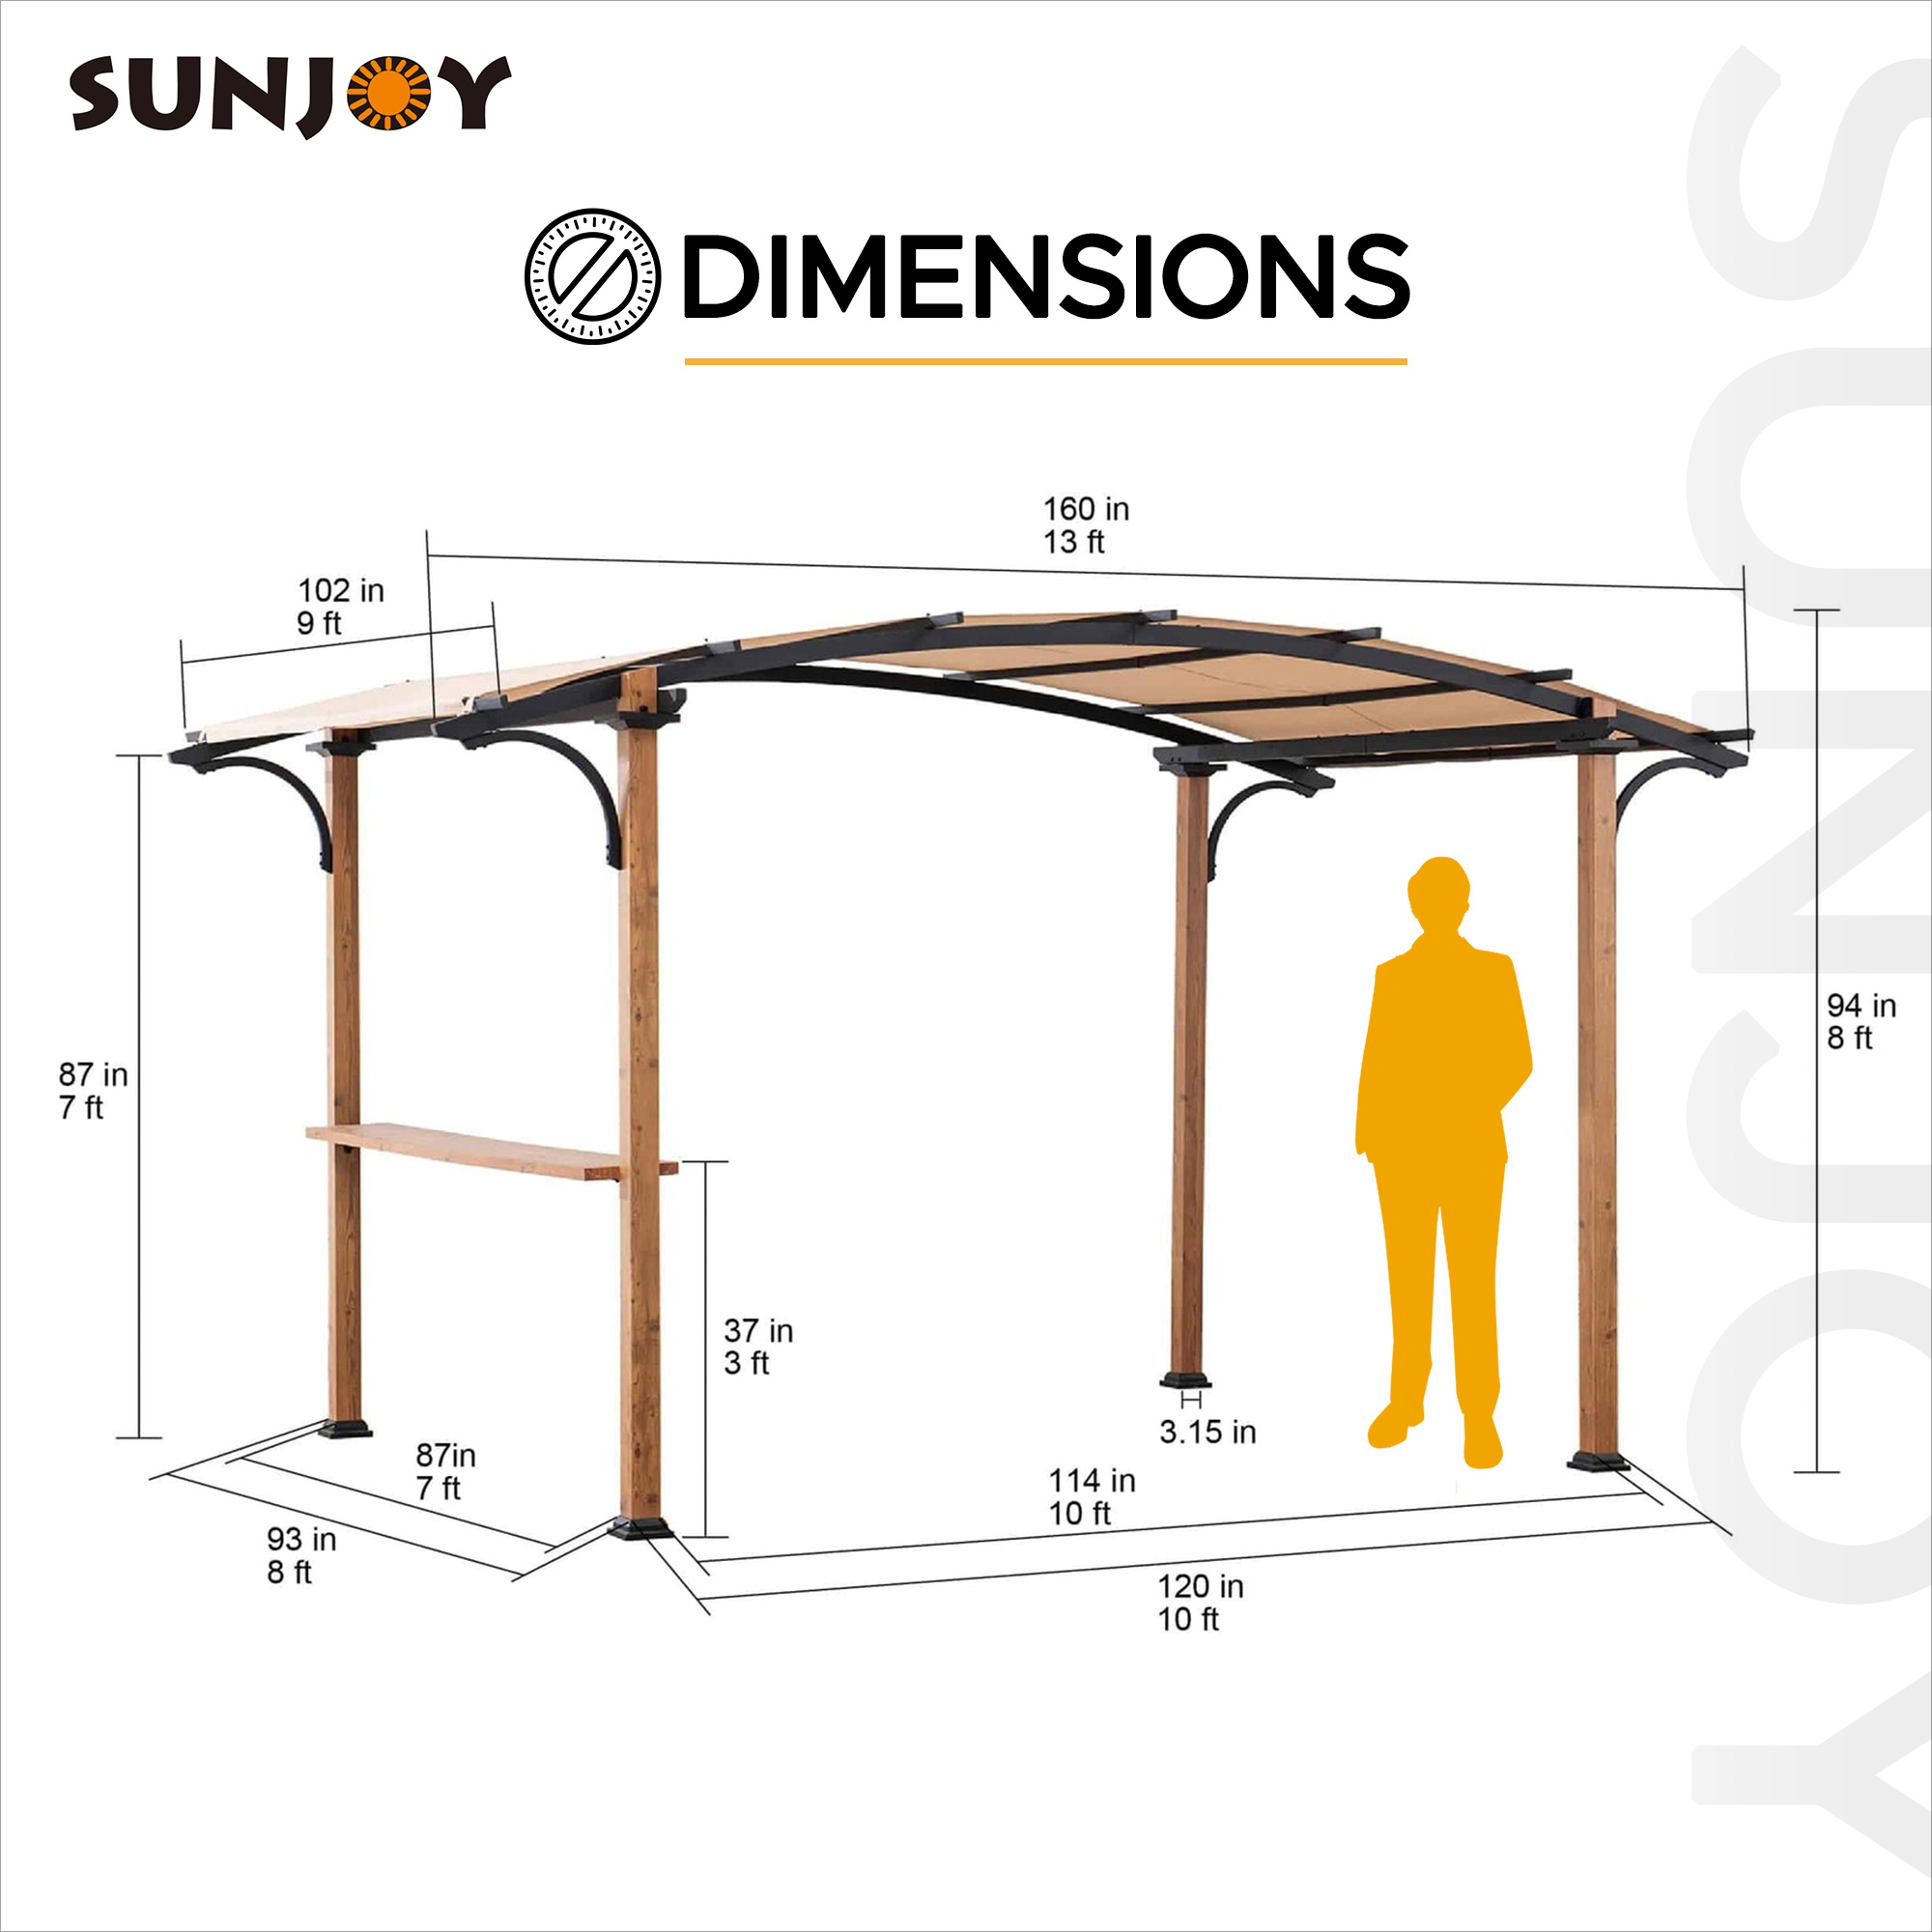 Sunjoy Beechhurst 8.5 ft. x 13 ft. Steel Arched Pergola with Natural Wood Looking Finish and Tan Shade - image 5 of 9